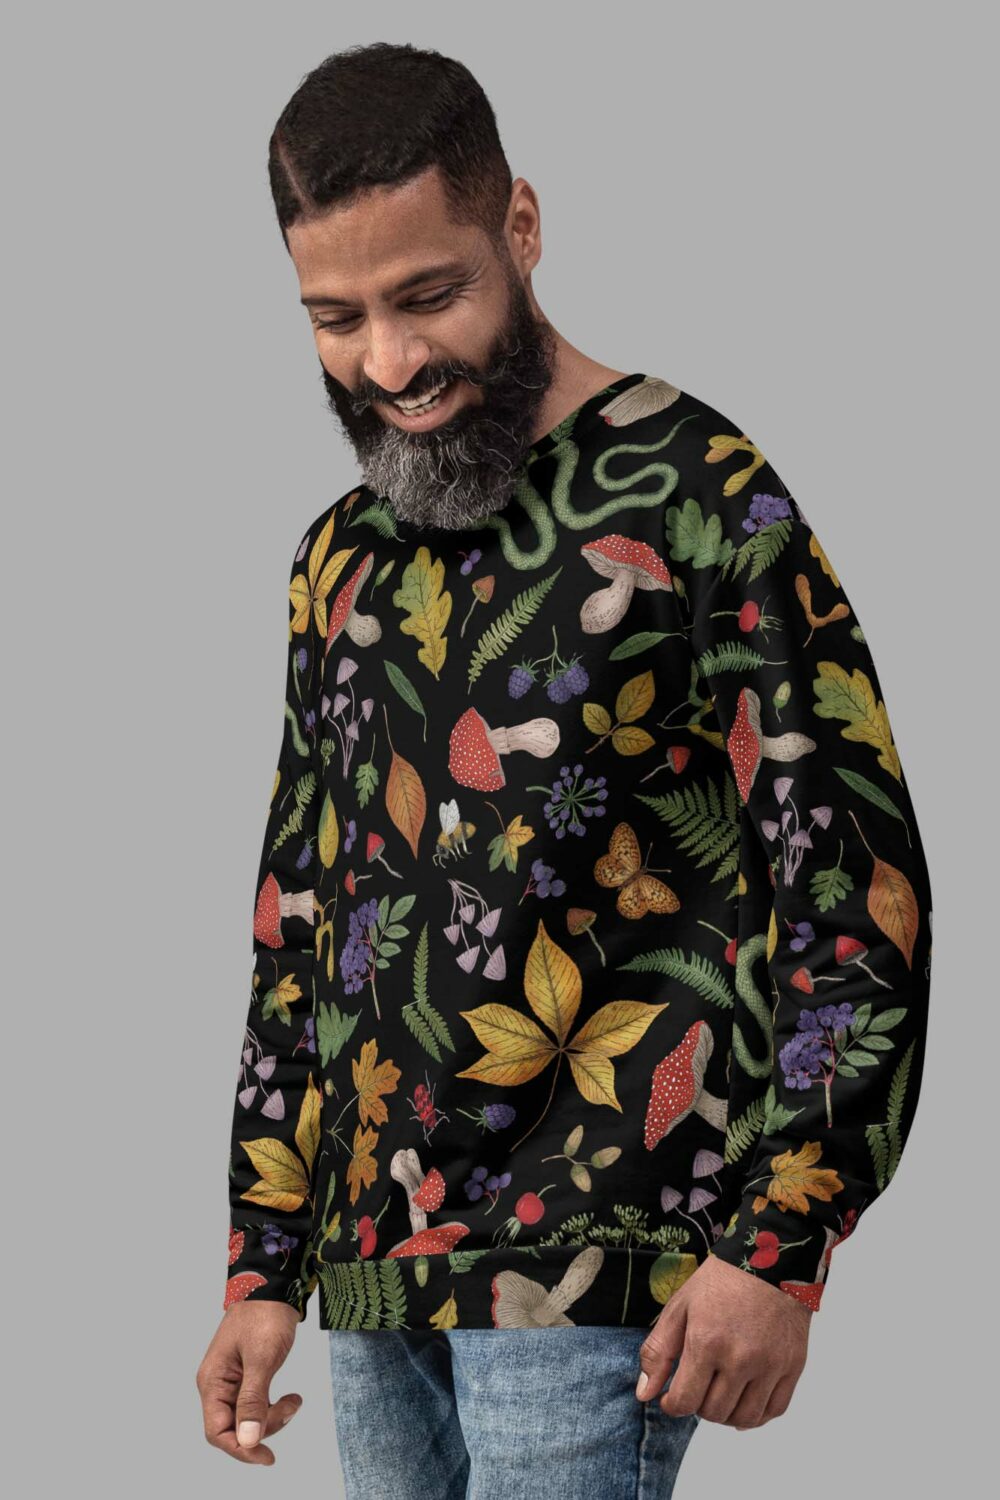 cosmic drifters hedge witch print sweater side